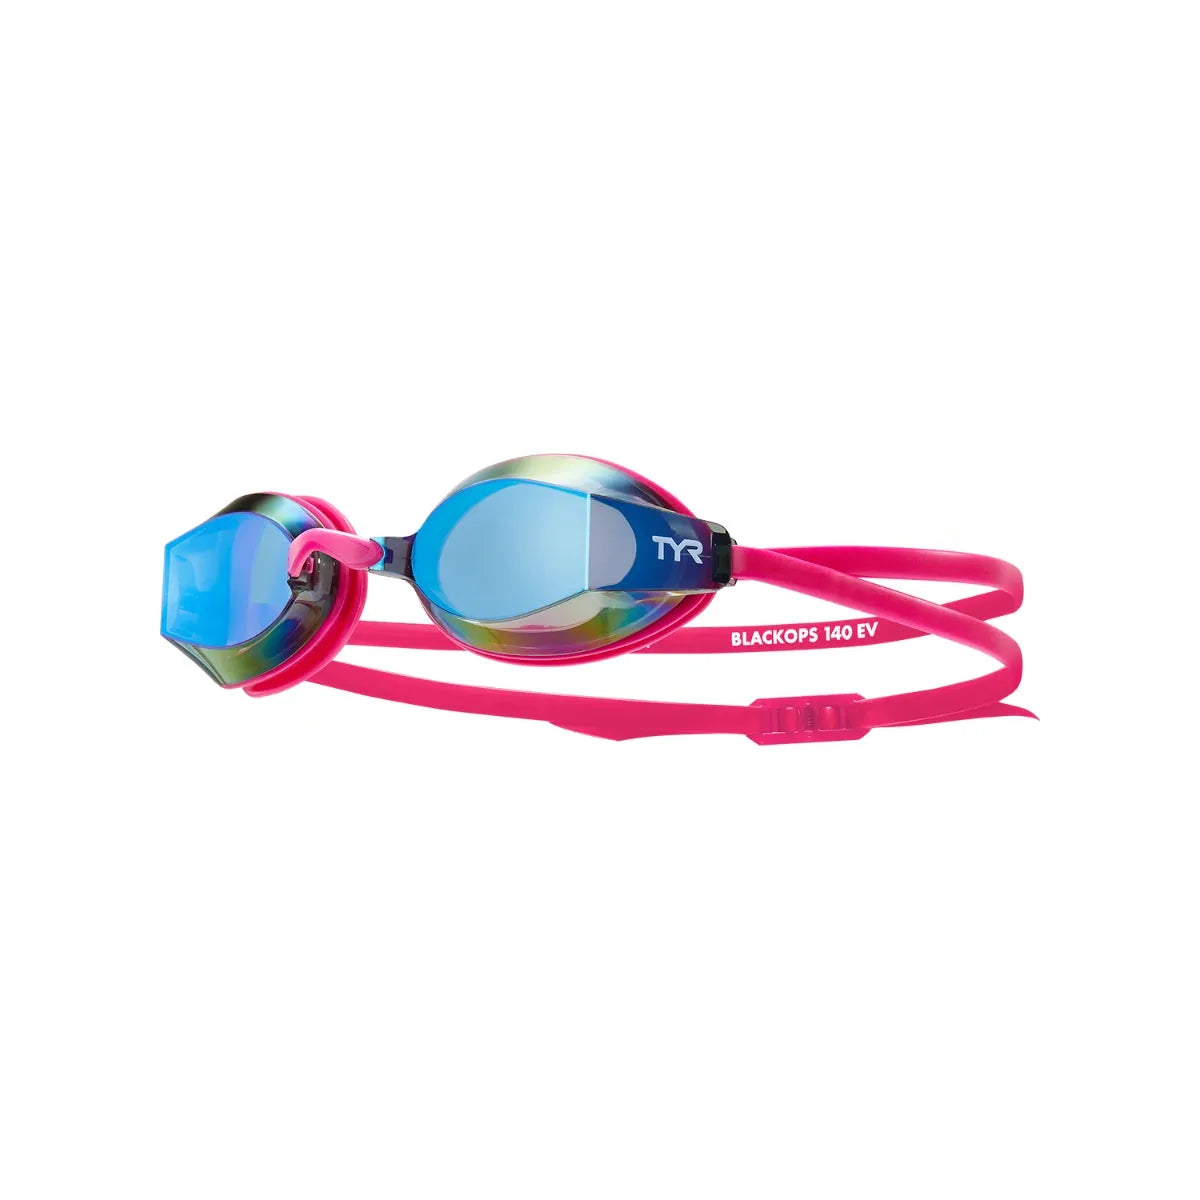 TYR Black Ops 140 EV Mirrored Woman's Goggle